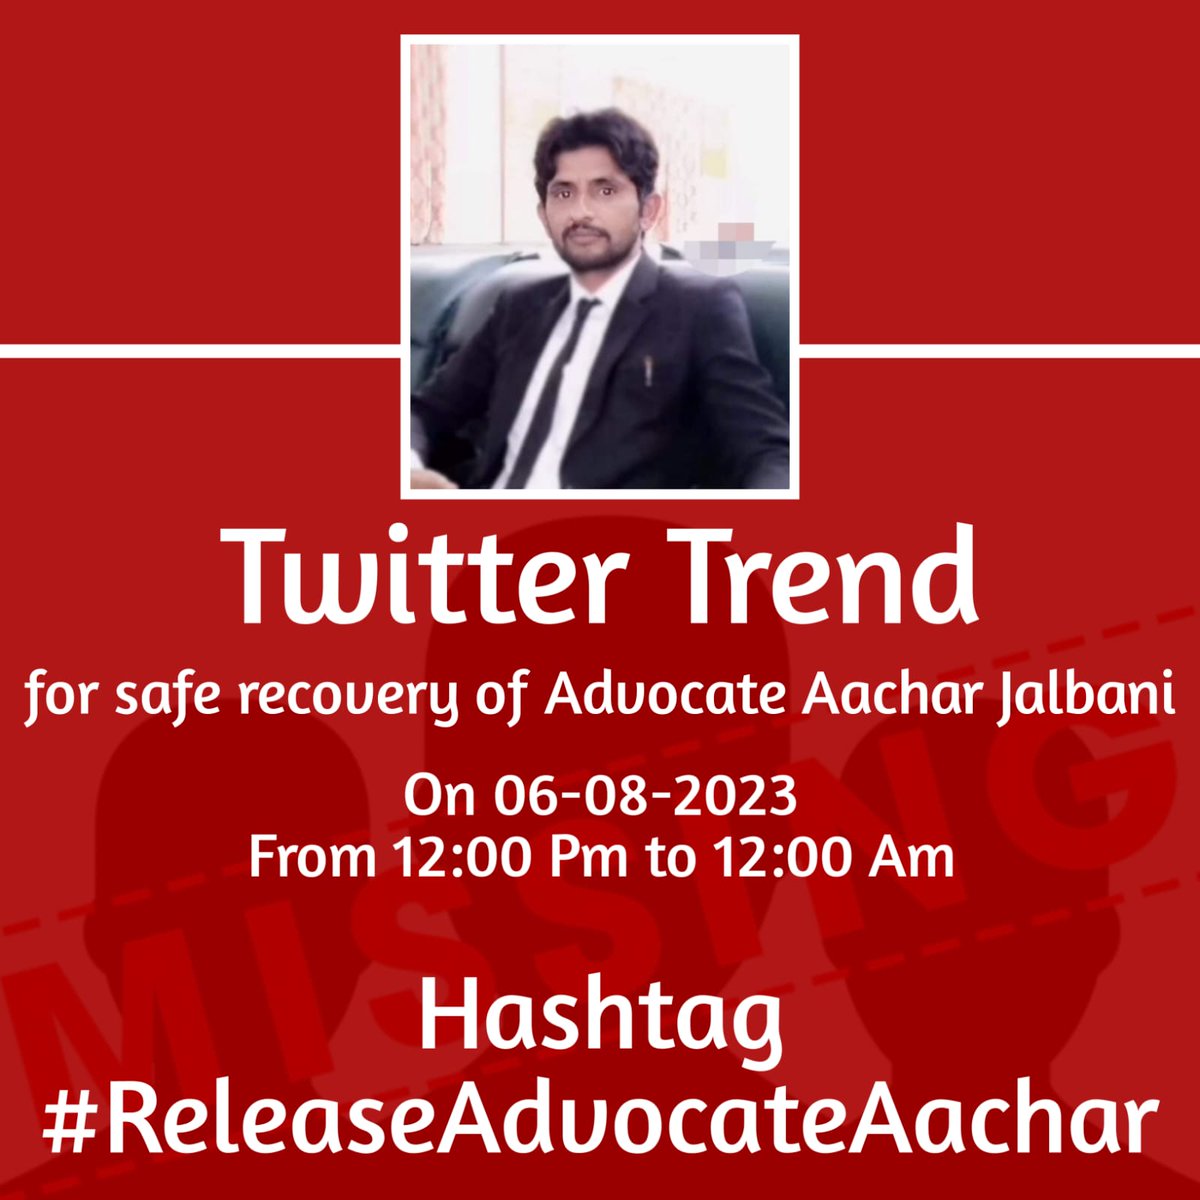 Advocate Aachar Jalbani's abduction shocks our conscience and reminds us of the urgency to protect human rights defenders. Let's demand his safe return and an end to this injustice. #ReleaseAdvocateAachar #DefendHumanRights